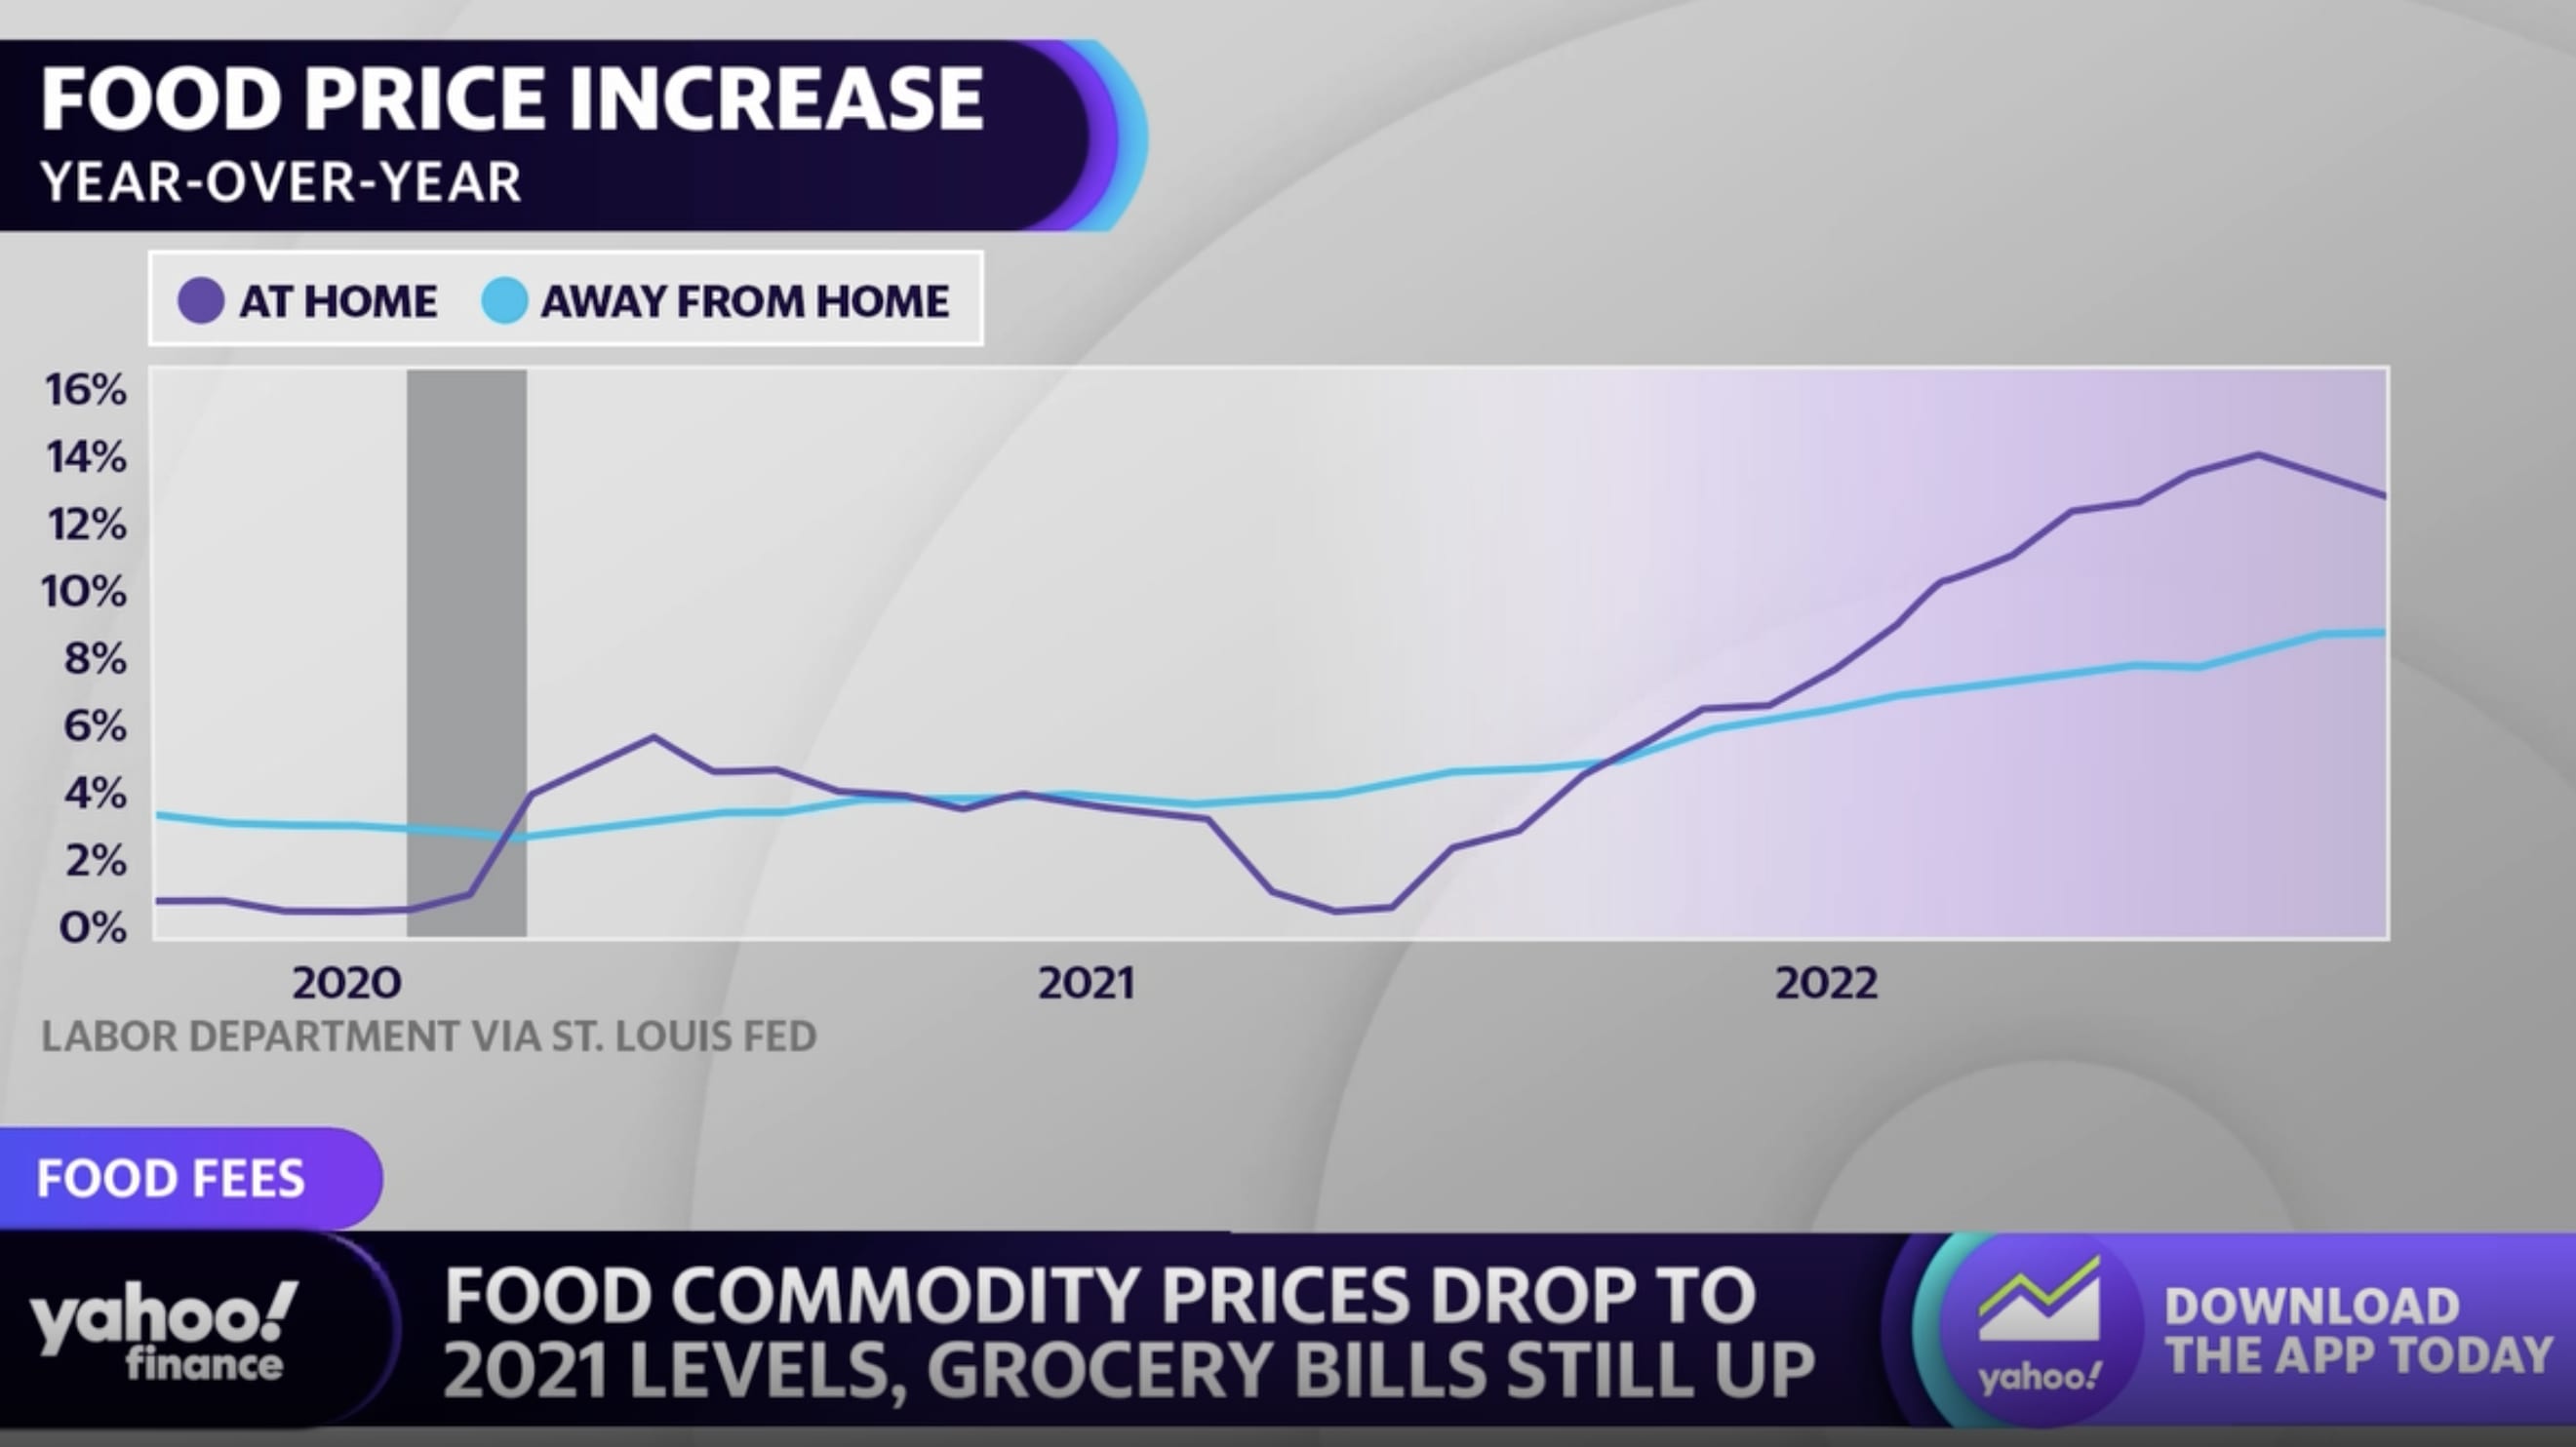 Food commodity prices fall to 2021 levels while consumer grocery bills  remain elevated